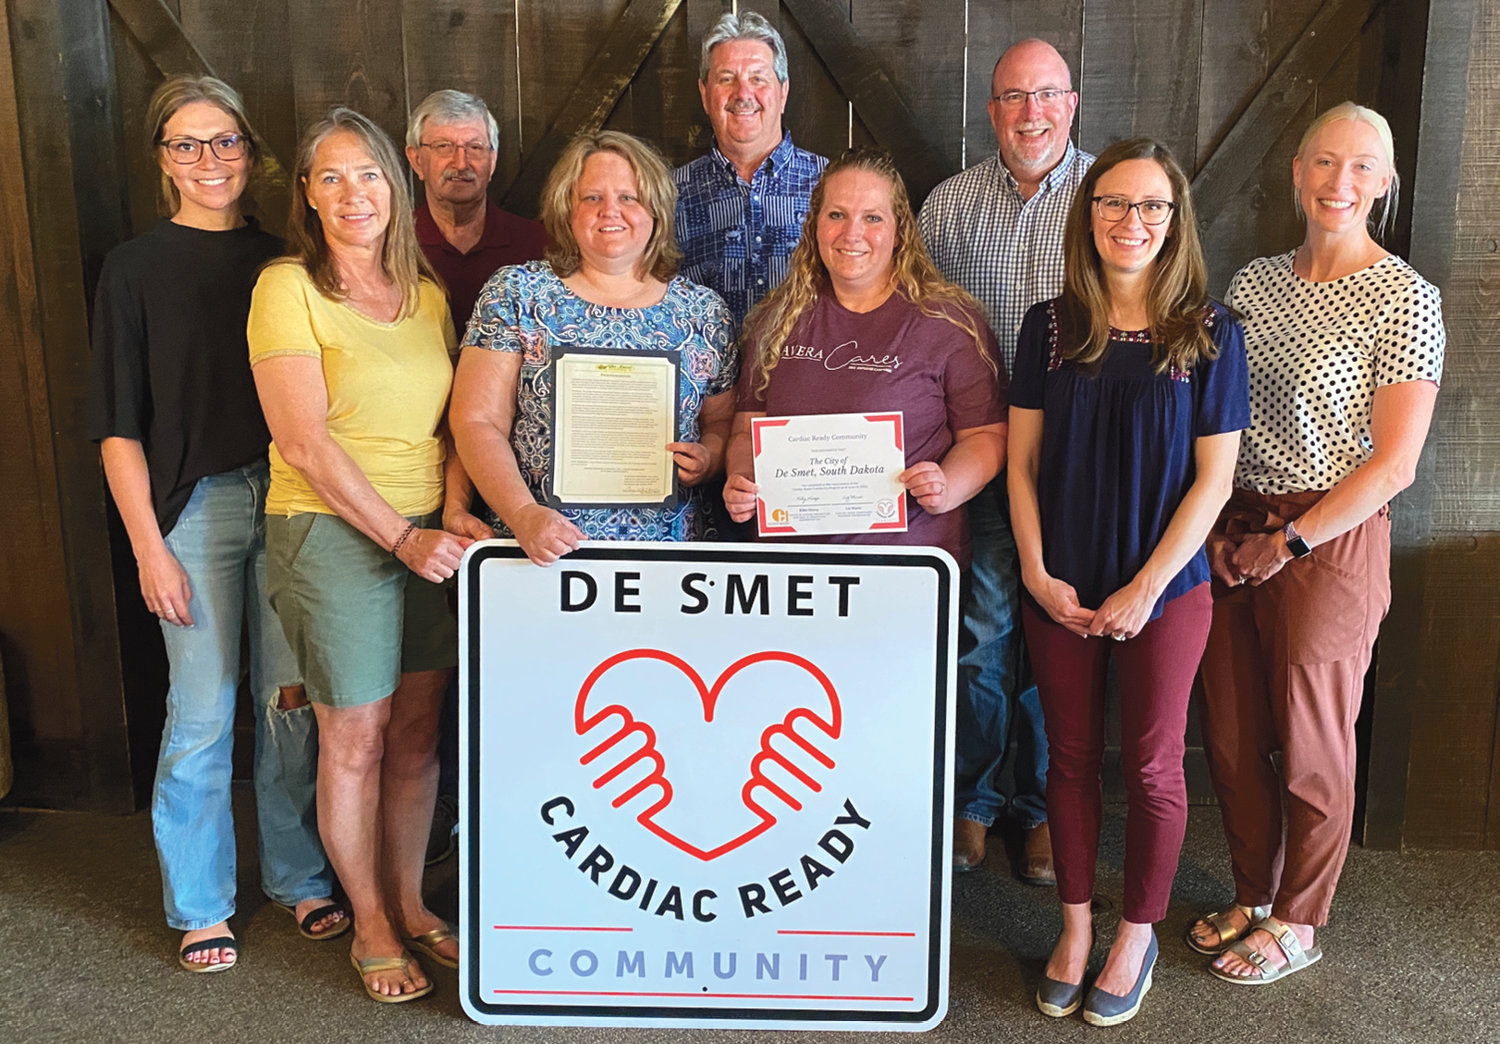 Members of the De Smet Wellness Coalition and the Cardiac Readiness Committee met on Tuesday to accept the certificate from the South Dakota Department of Health and signs to hang up on the outskirts of town. Members of the CRC committee there were Billi Aughenbaugh, back left, Mayor Gary Wolkow, Gordie Skyberg, Jim Girard and Liz Marso with the SDDOH and Lynn Beck, front left, Jodi Jung, Traci Smith and Darcie Lee.